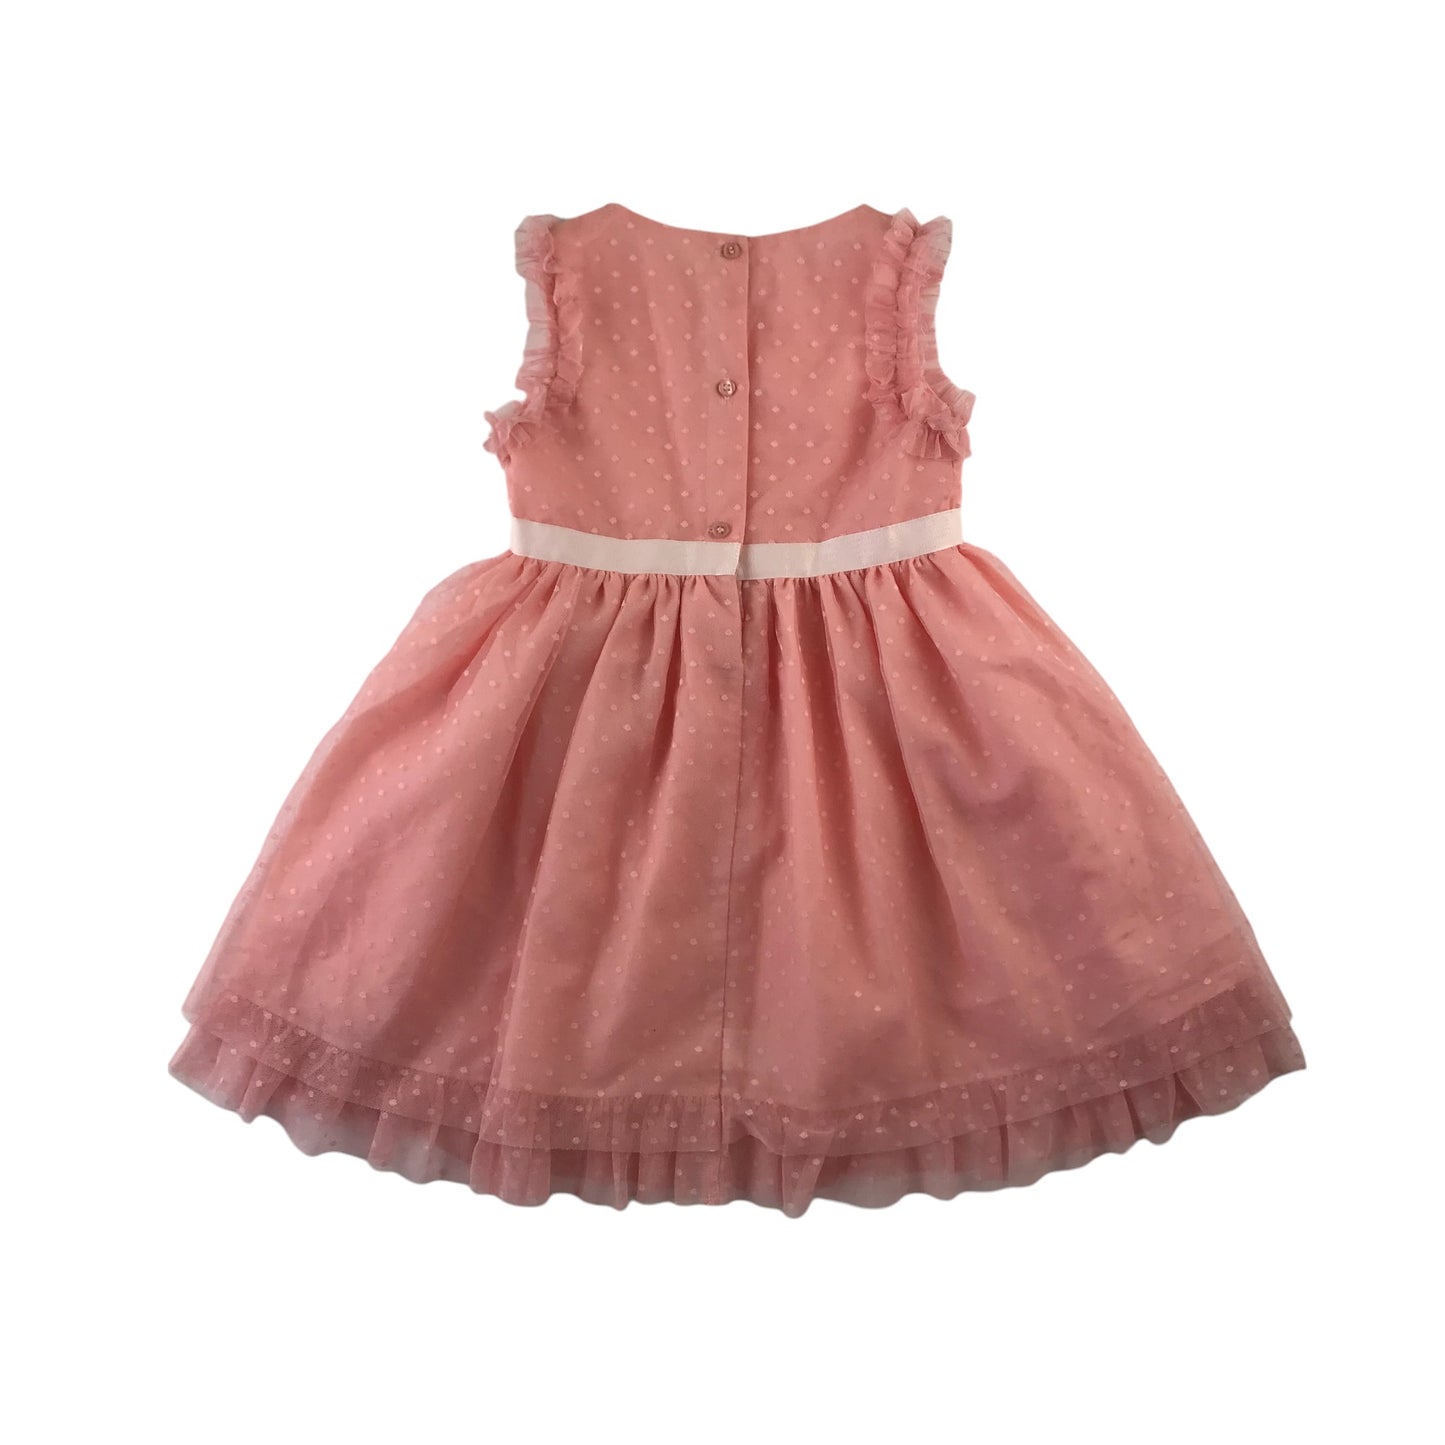 Next dress 4-5 years pink spot pattern tulle mesh layered party